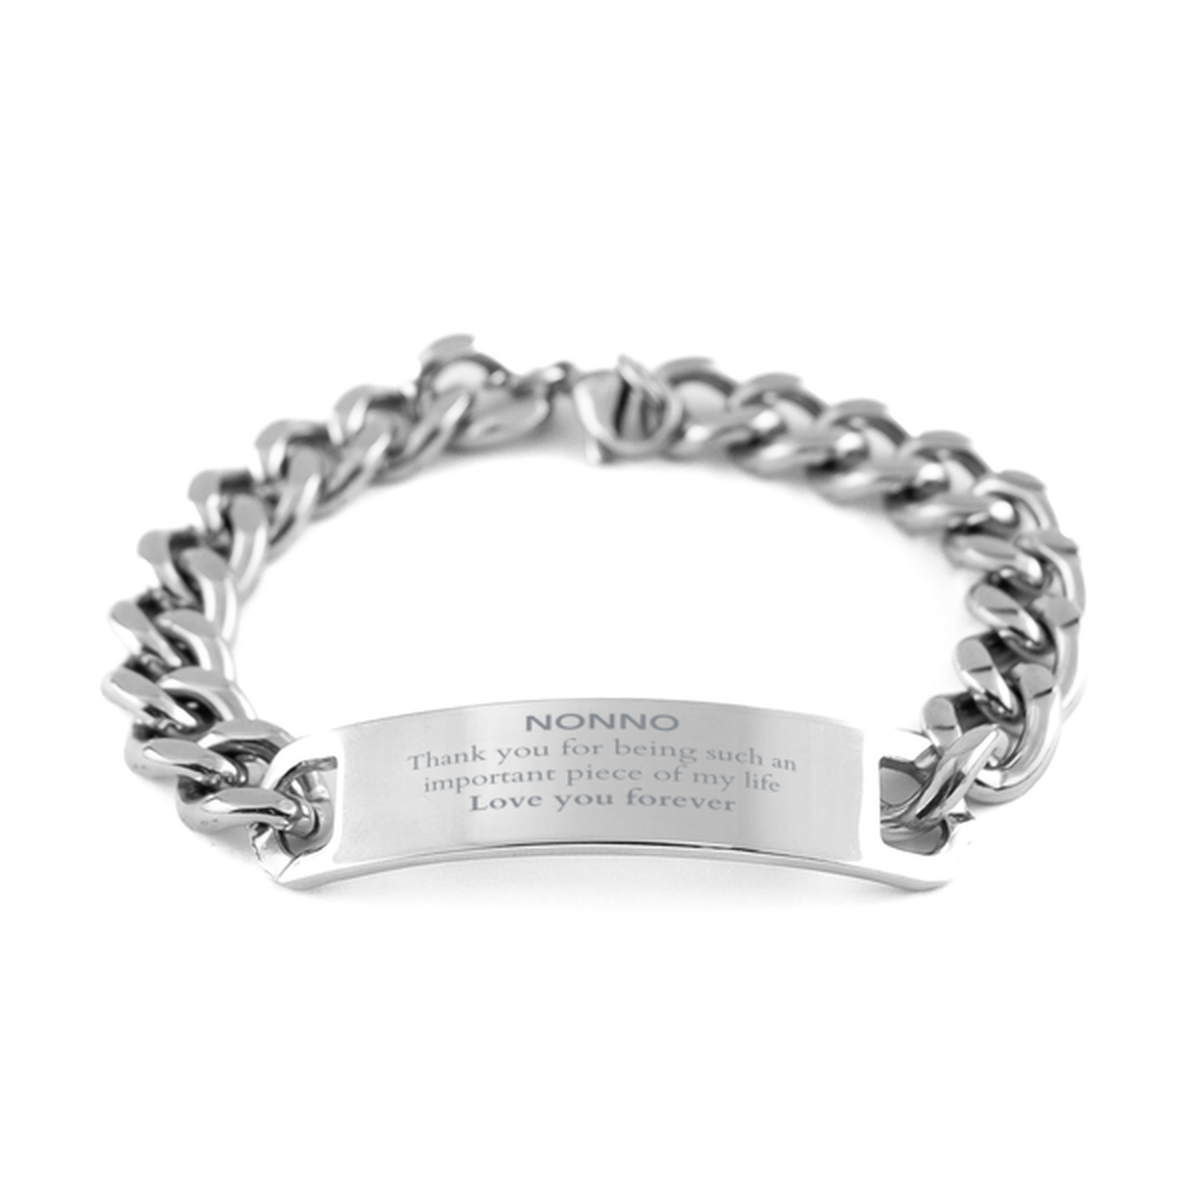 Appropriate Nonno Cuban Chain Stainless Steel Bracelet Epic Birthday Gifts for Nonno Thank you for being such an important piece of my life Nonno Christmas Mothers Fathers Day